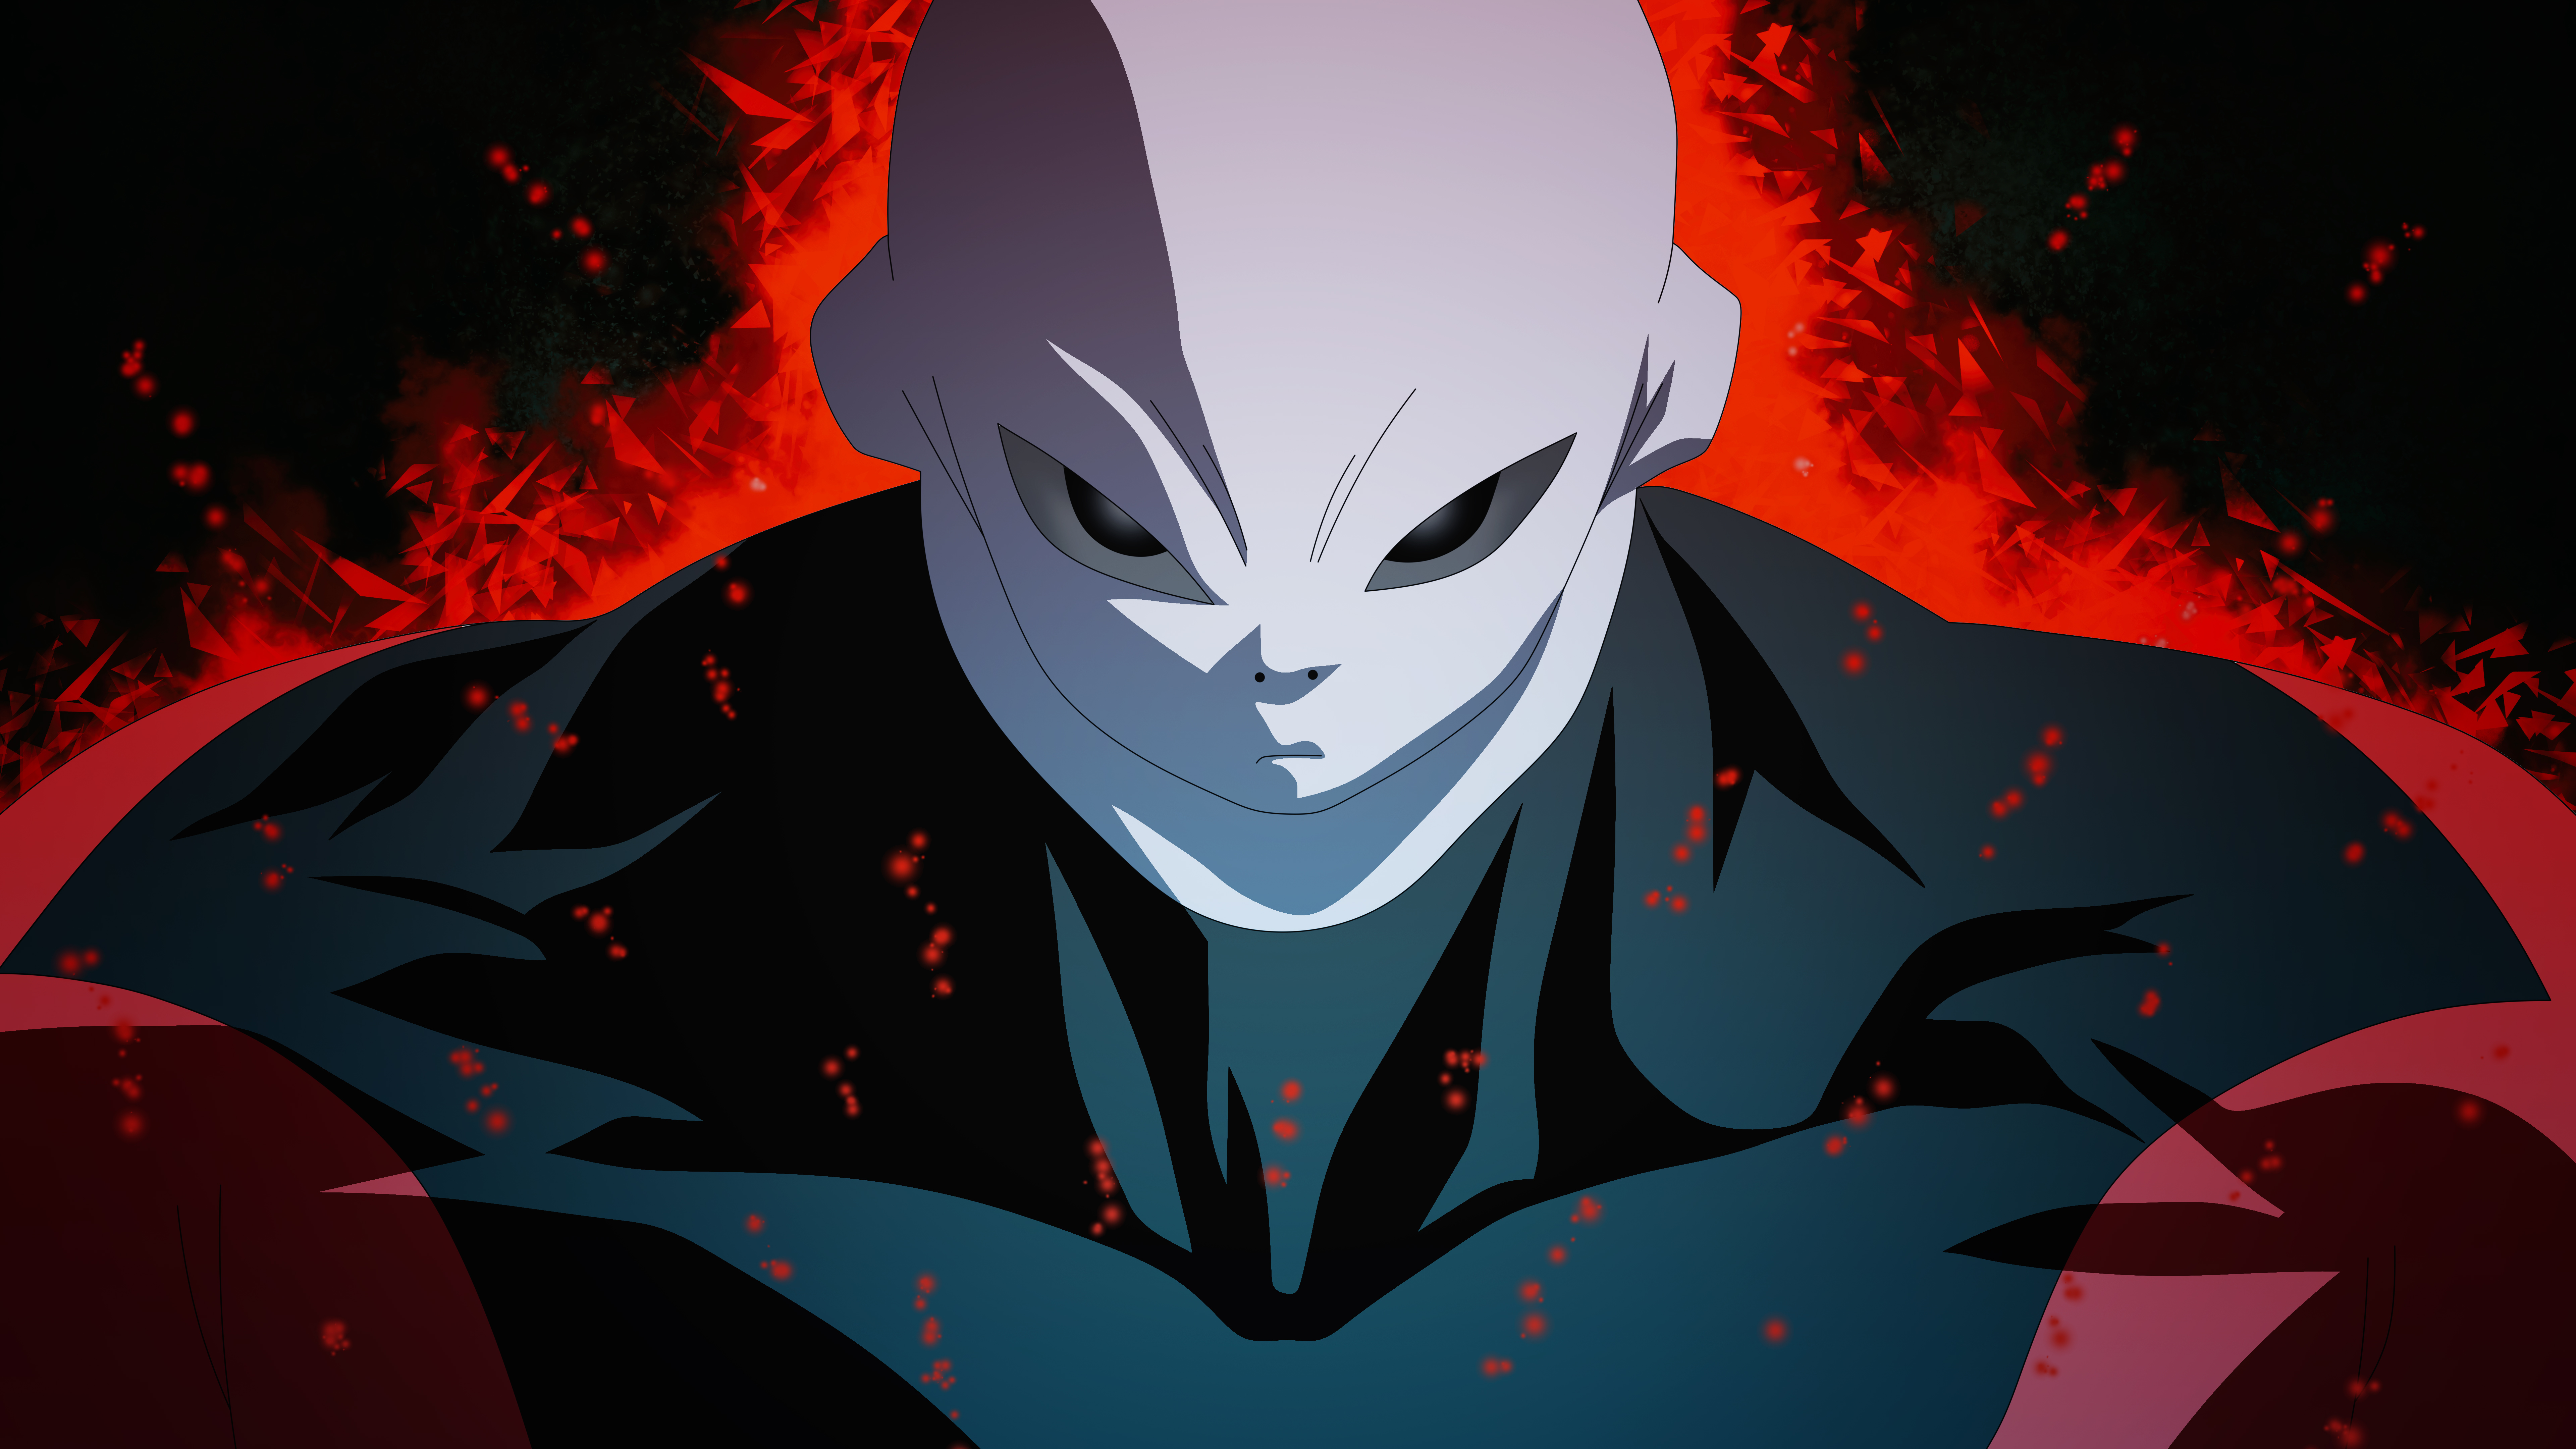 Jiren Dragon Ball Super Hd Anime 4k Wallpapers Images Backgrounds Photos And Pictures